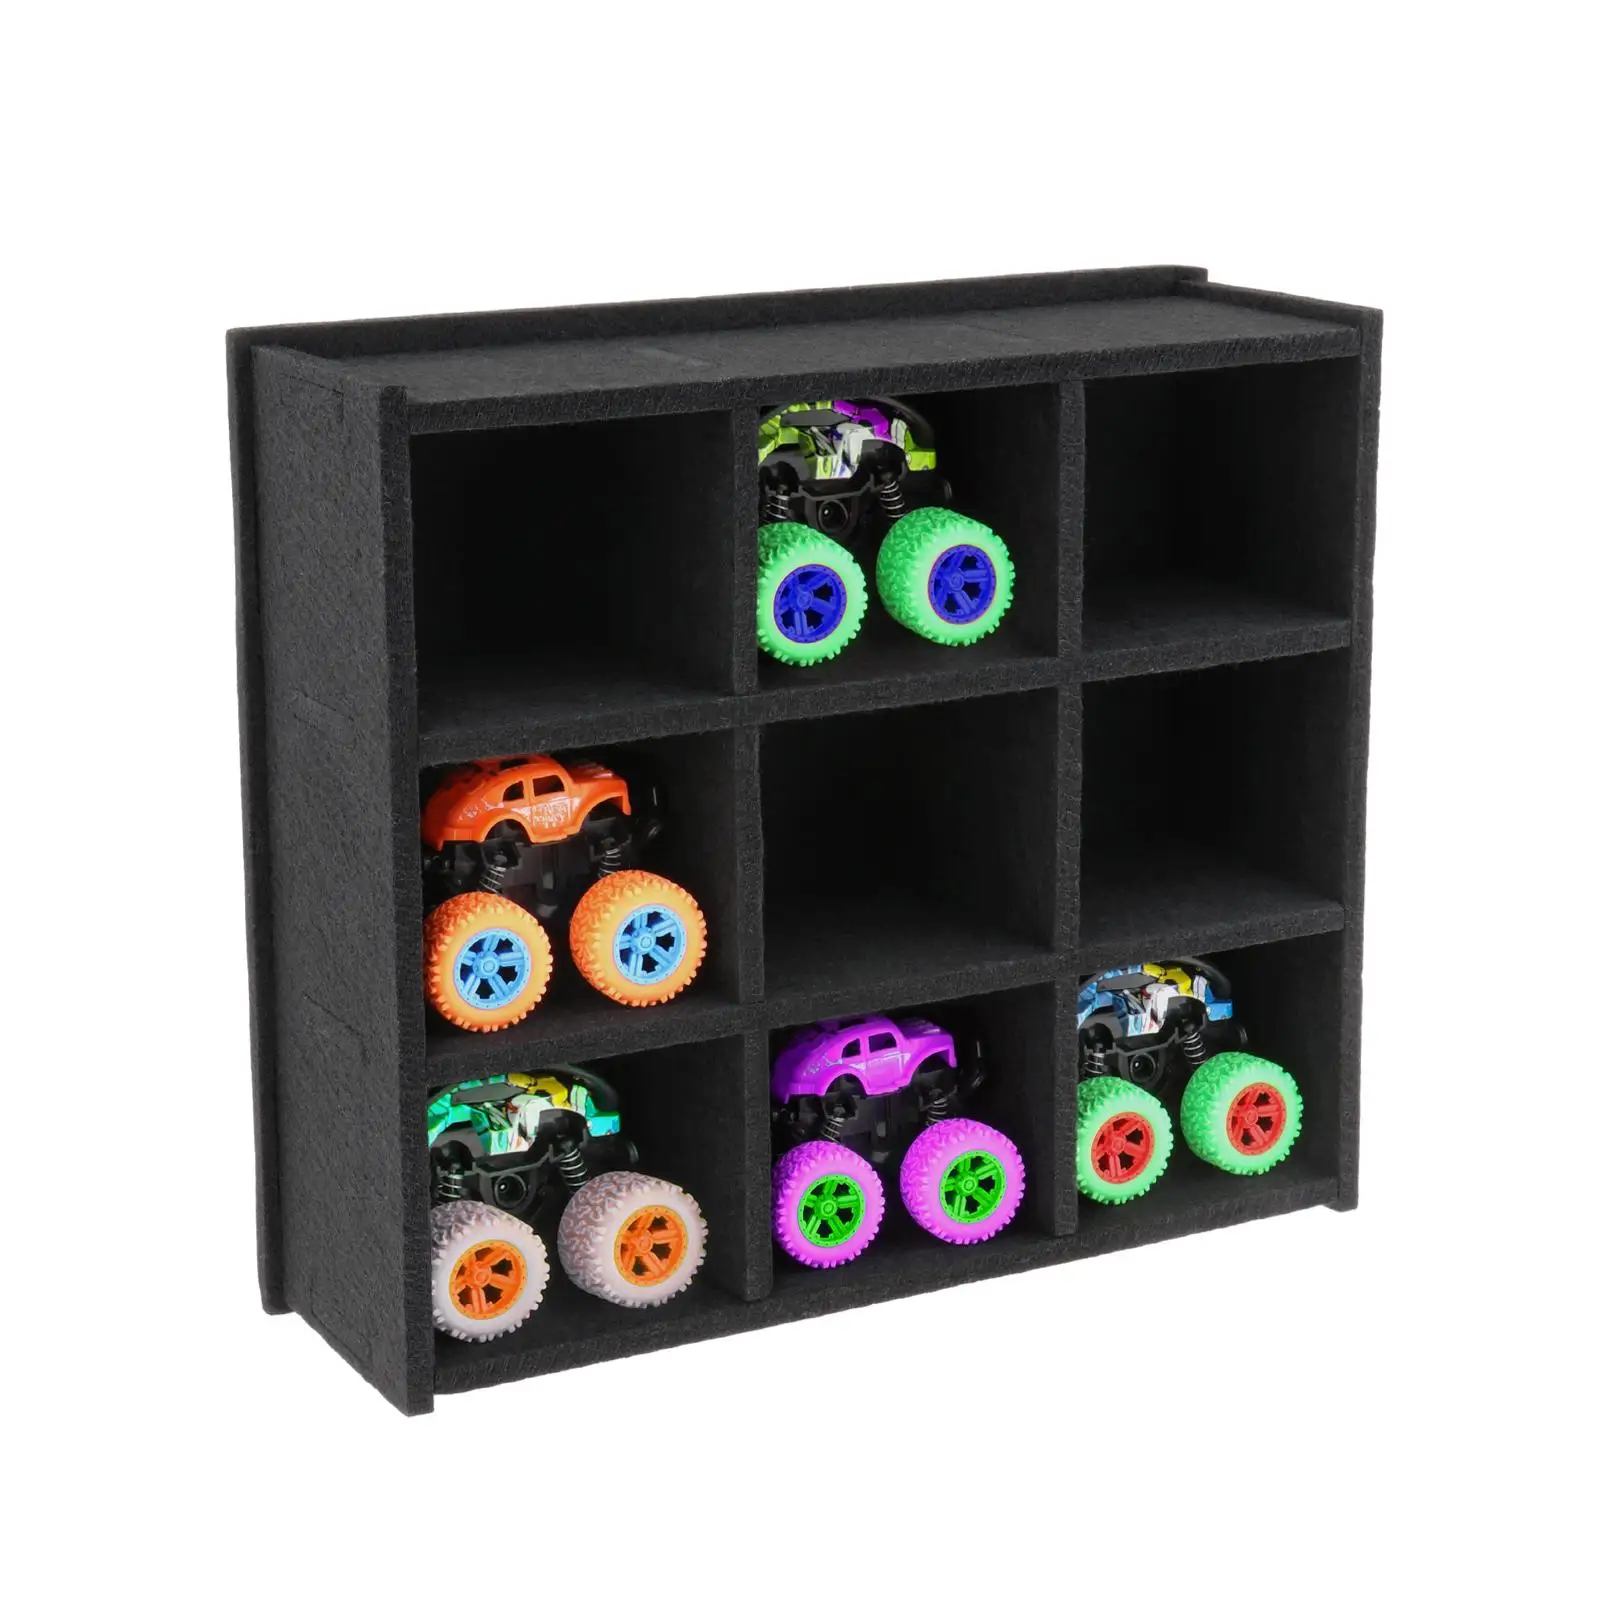 1:64 Scale Toy Trucks Door Wall Mounted Storage Case Felt Material for Kids to Organize Versatile